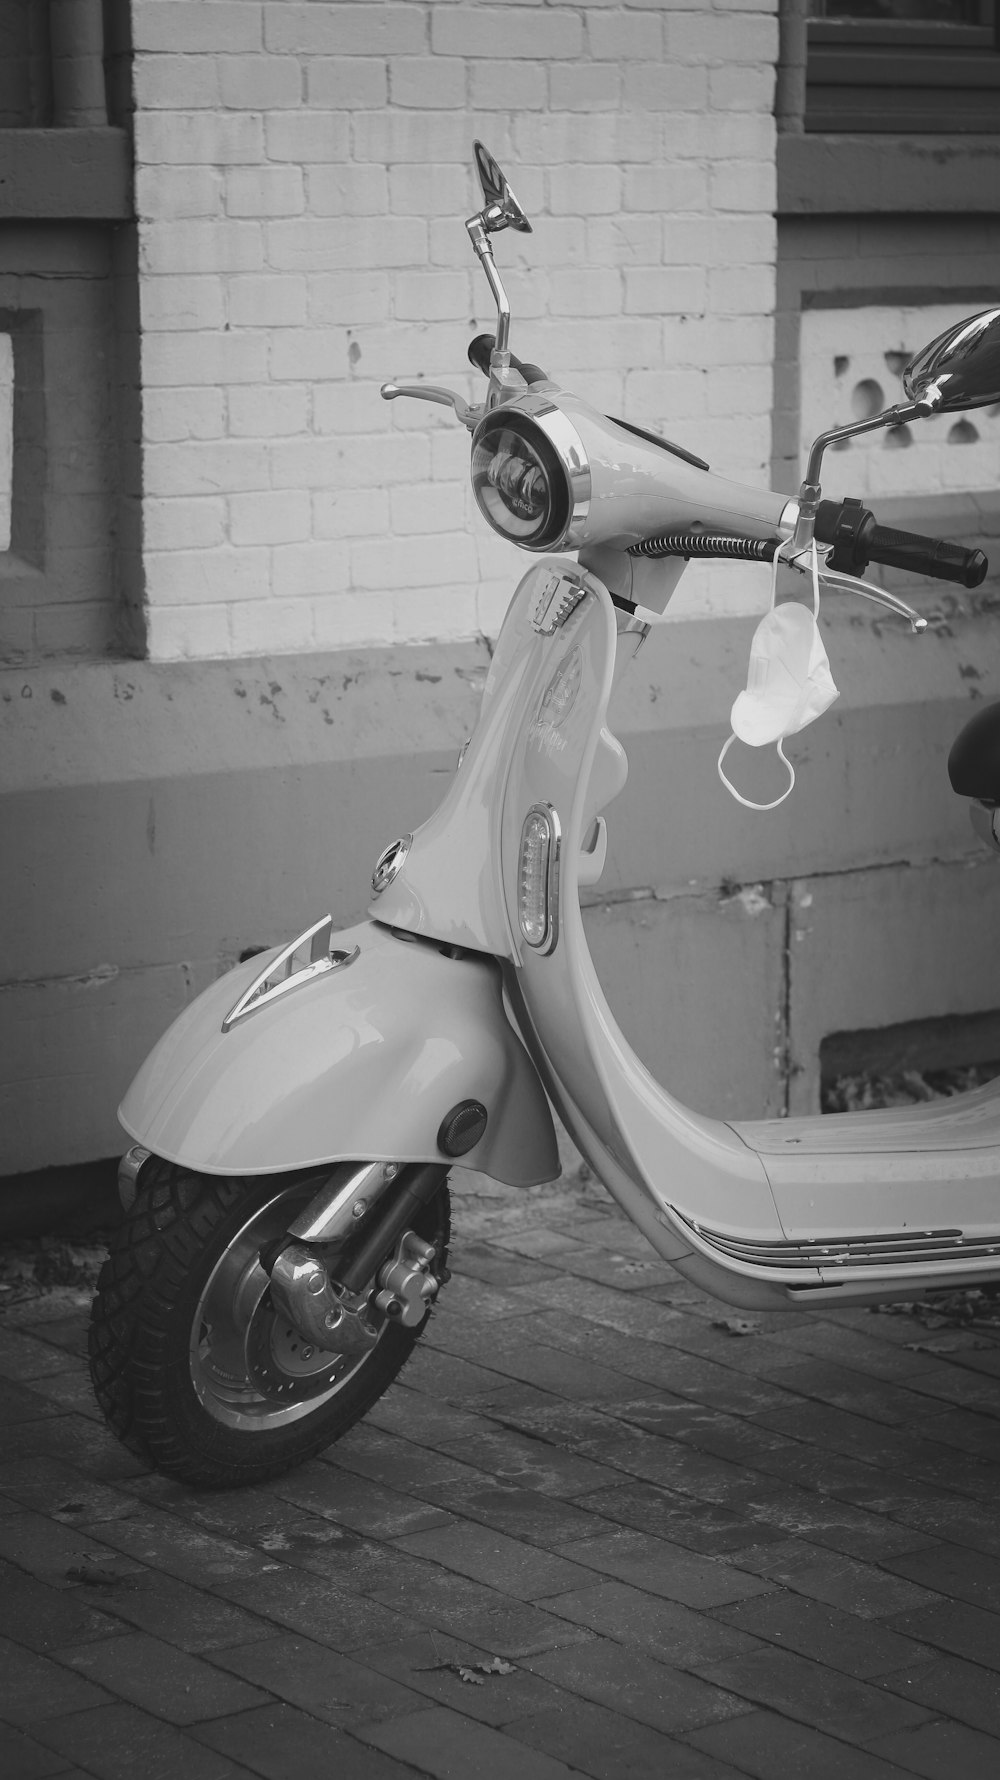 a scooter parked in front of a brick building